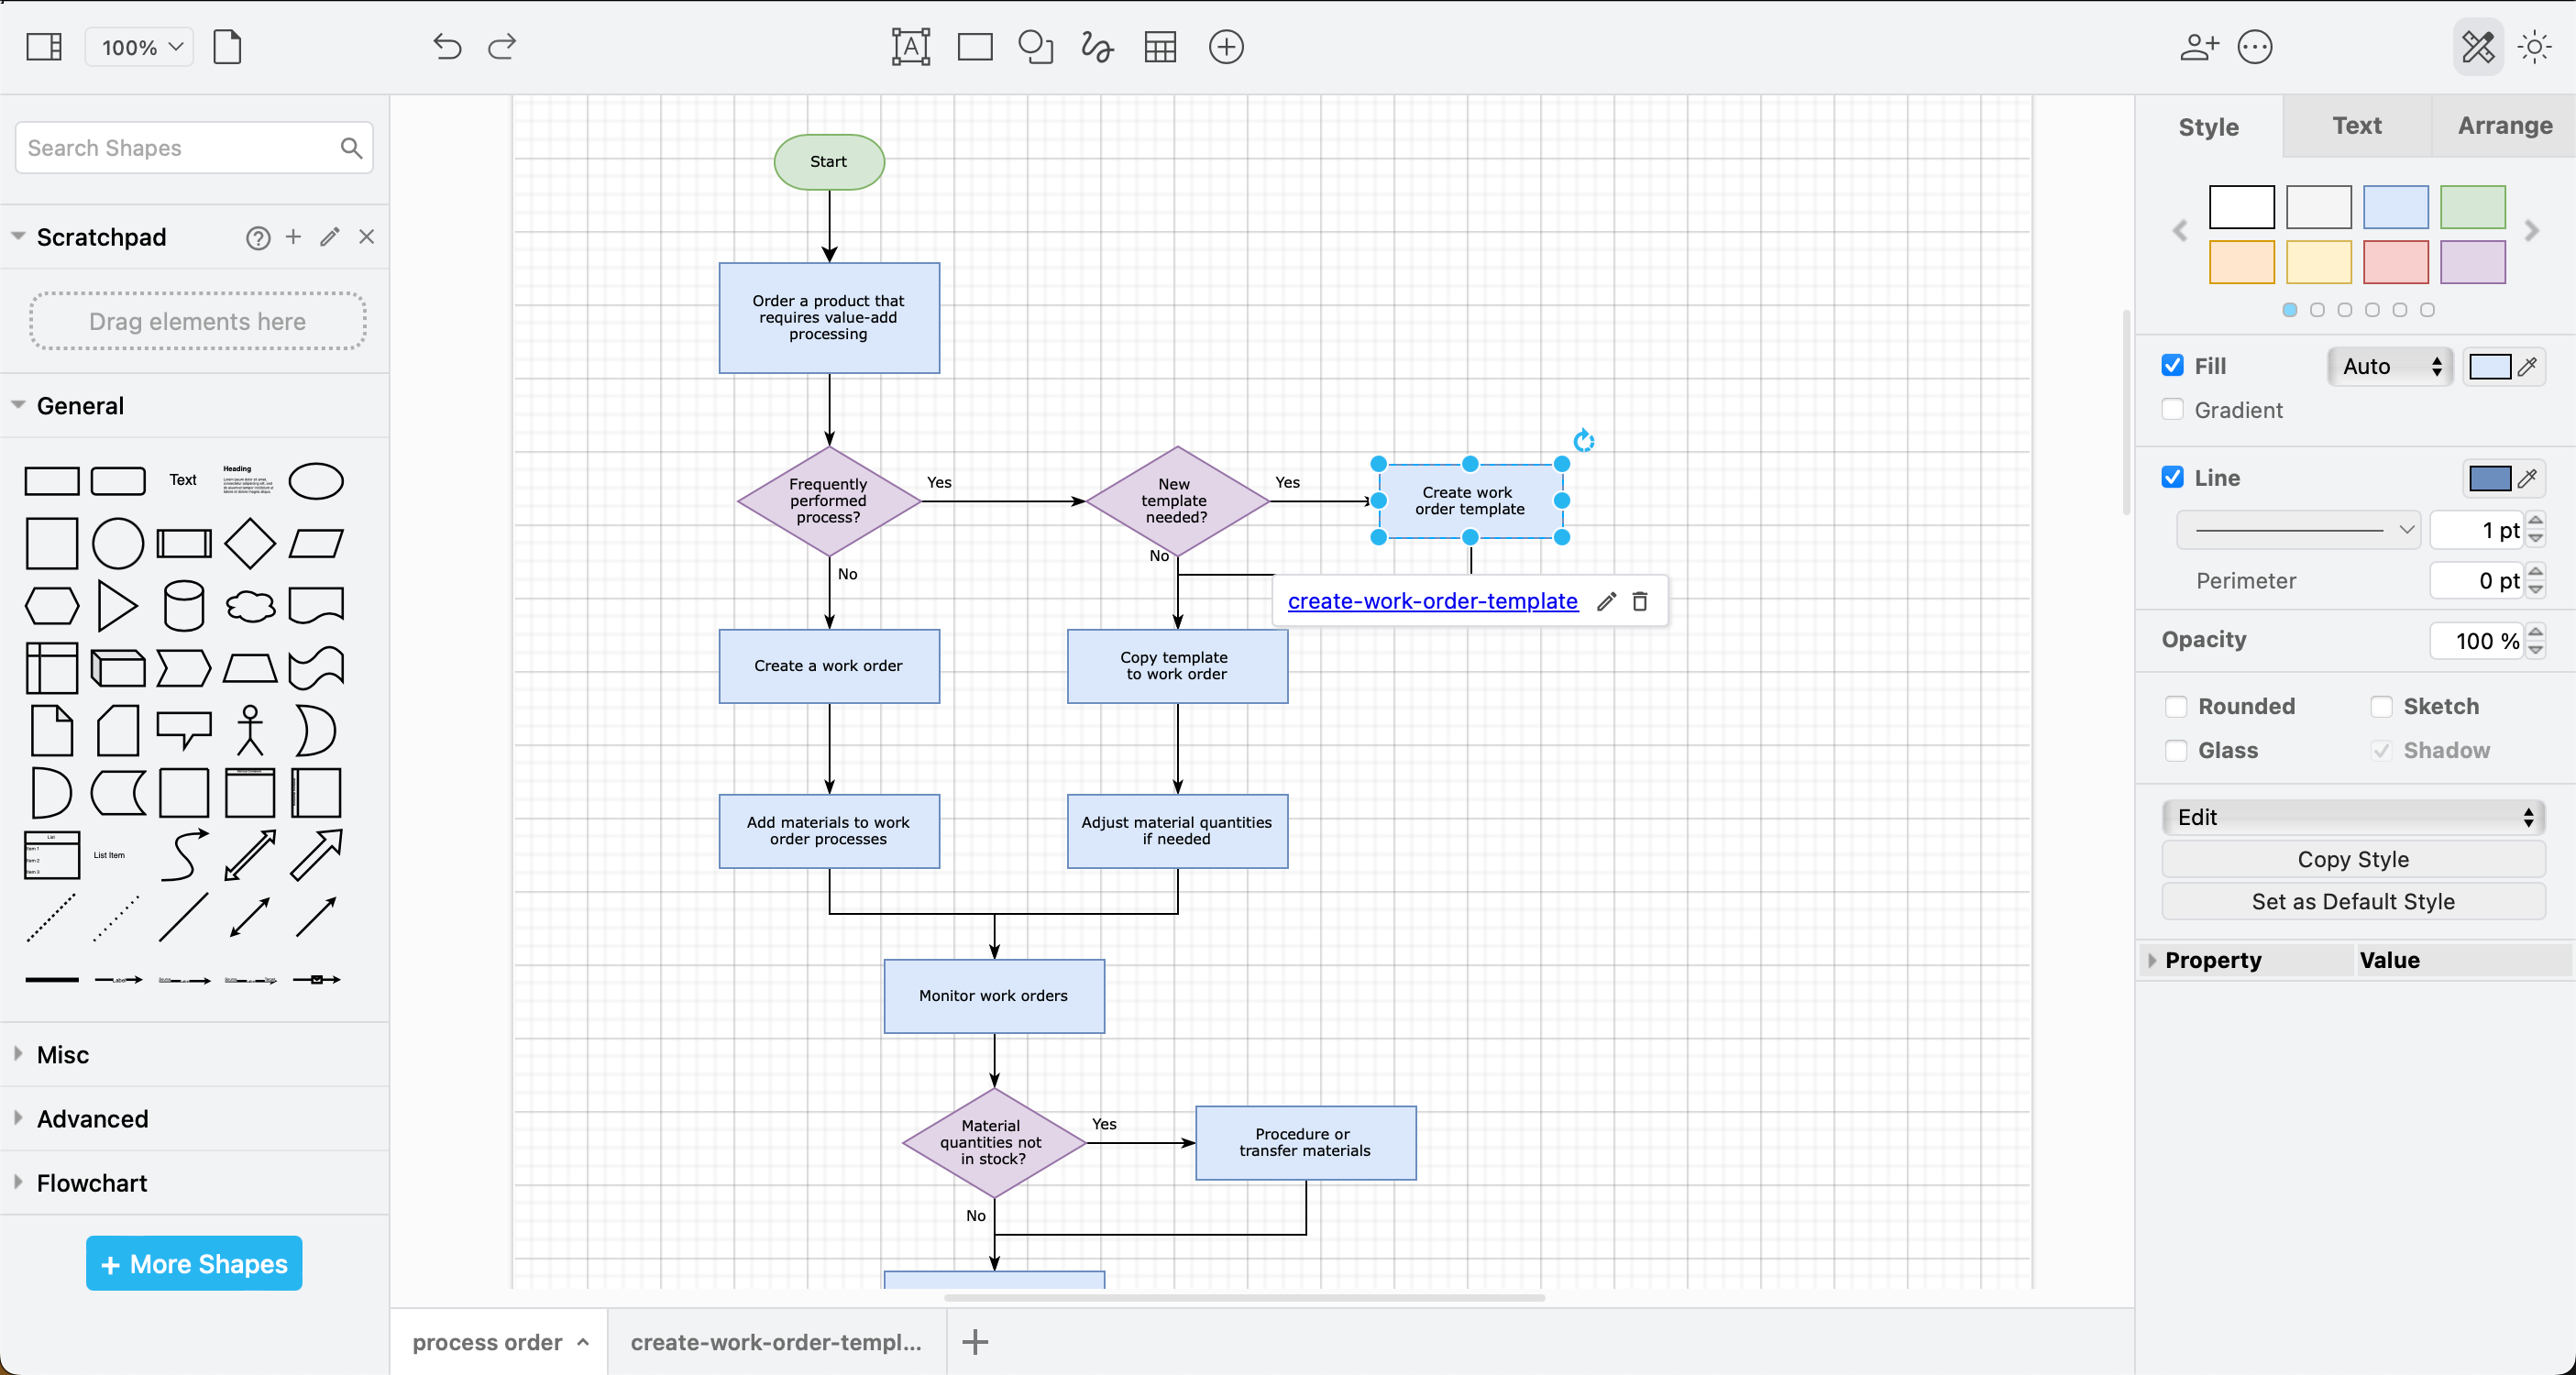 Flowchart and process model shapes are in the General and Flowchart shape libraries in draw.io